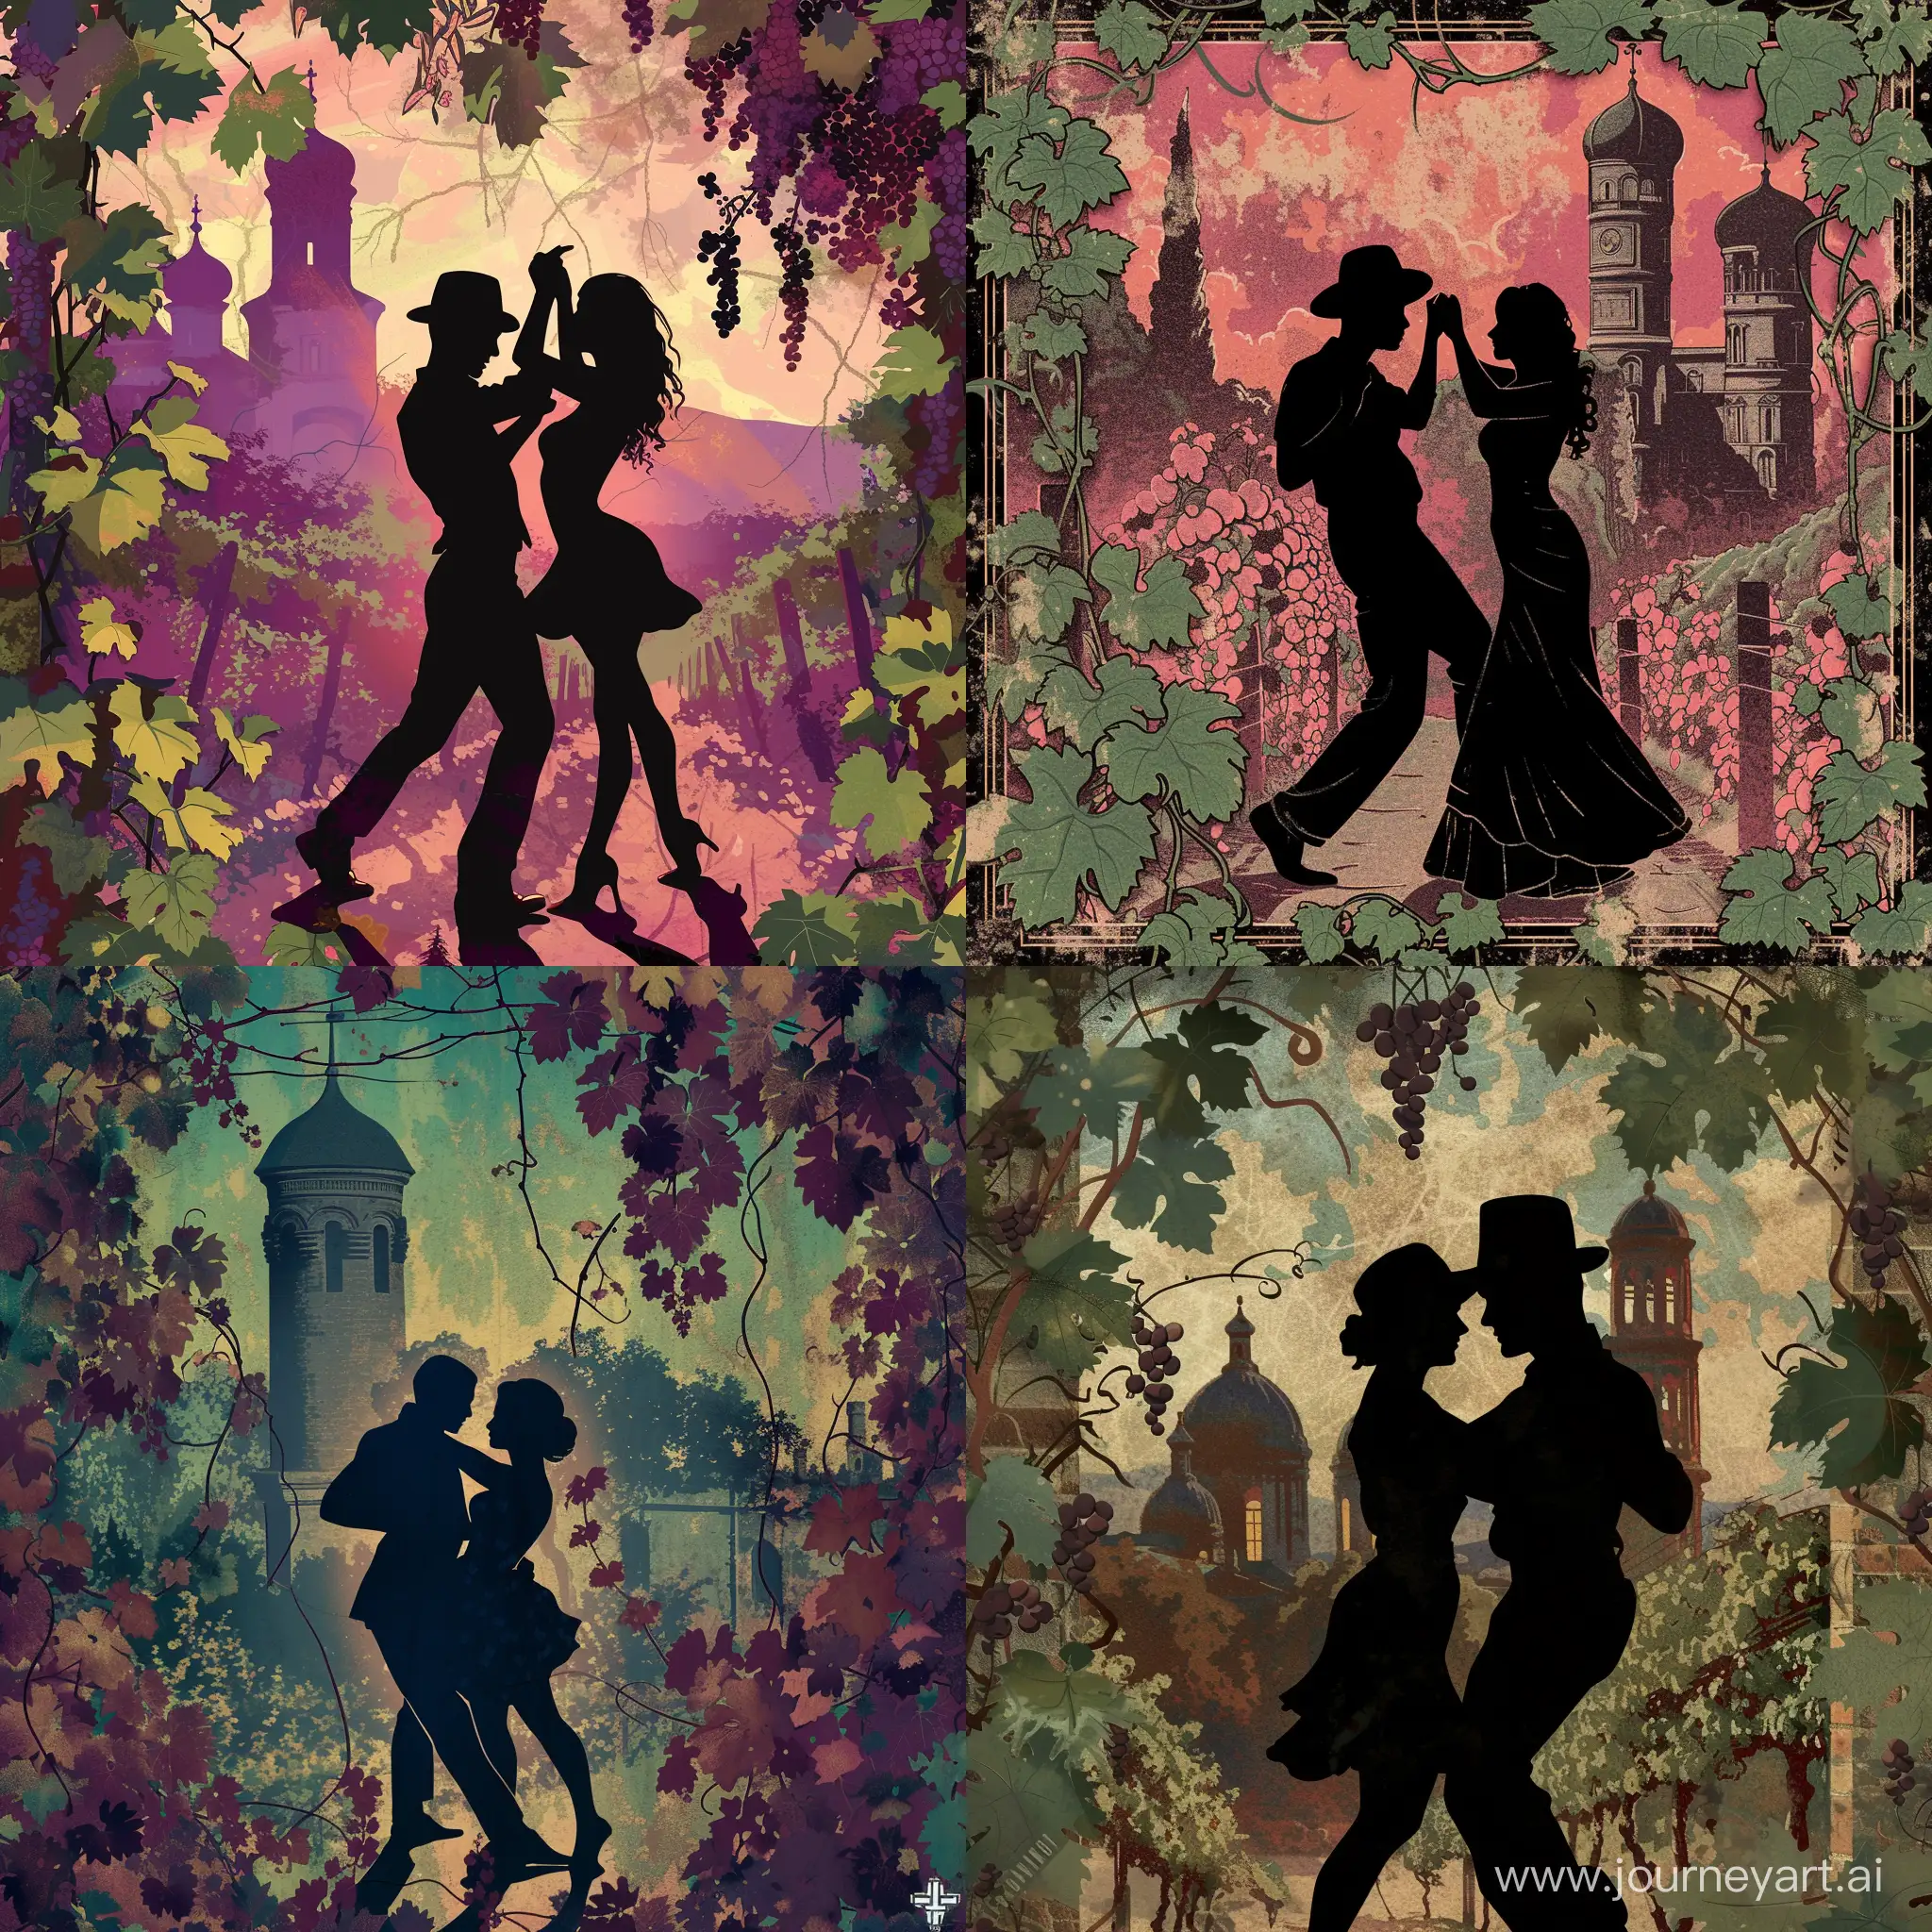 Passionate-Latin-Dance-in-the-Shadows-Amidst-Grapevines-and-Georgian-Towers